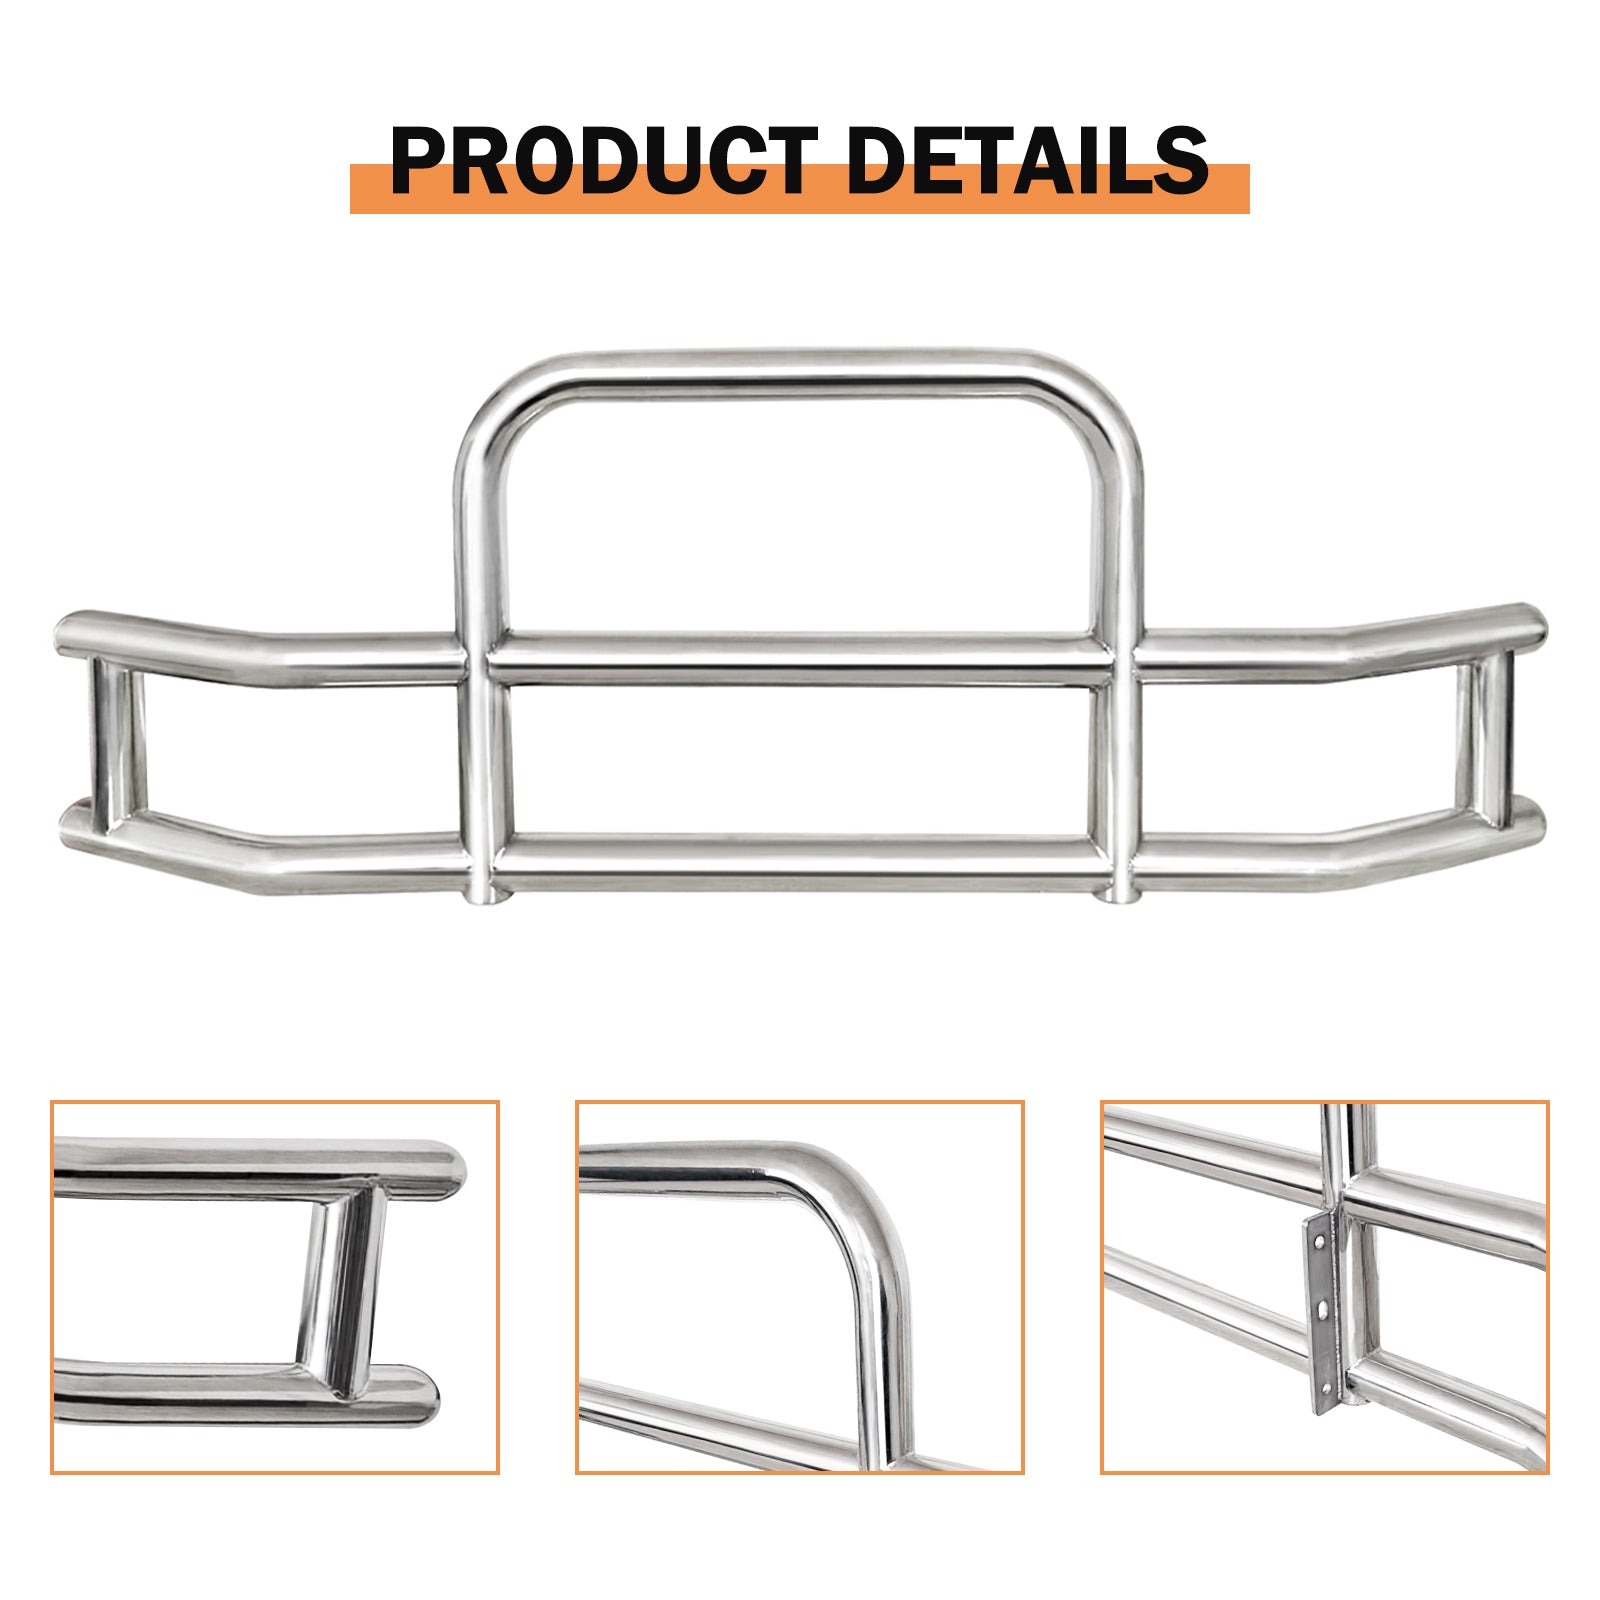 Stainless Steel Deer Guard Bumper for Freightliner chrome-stainless steel